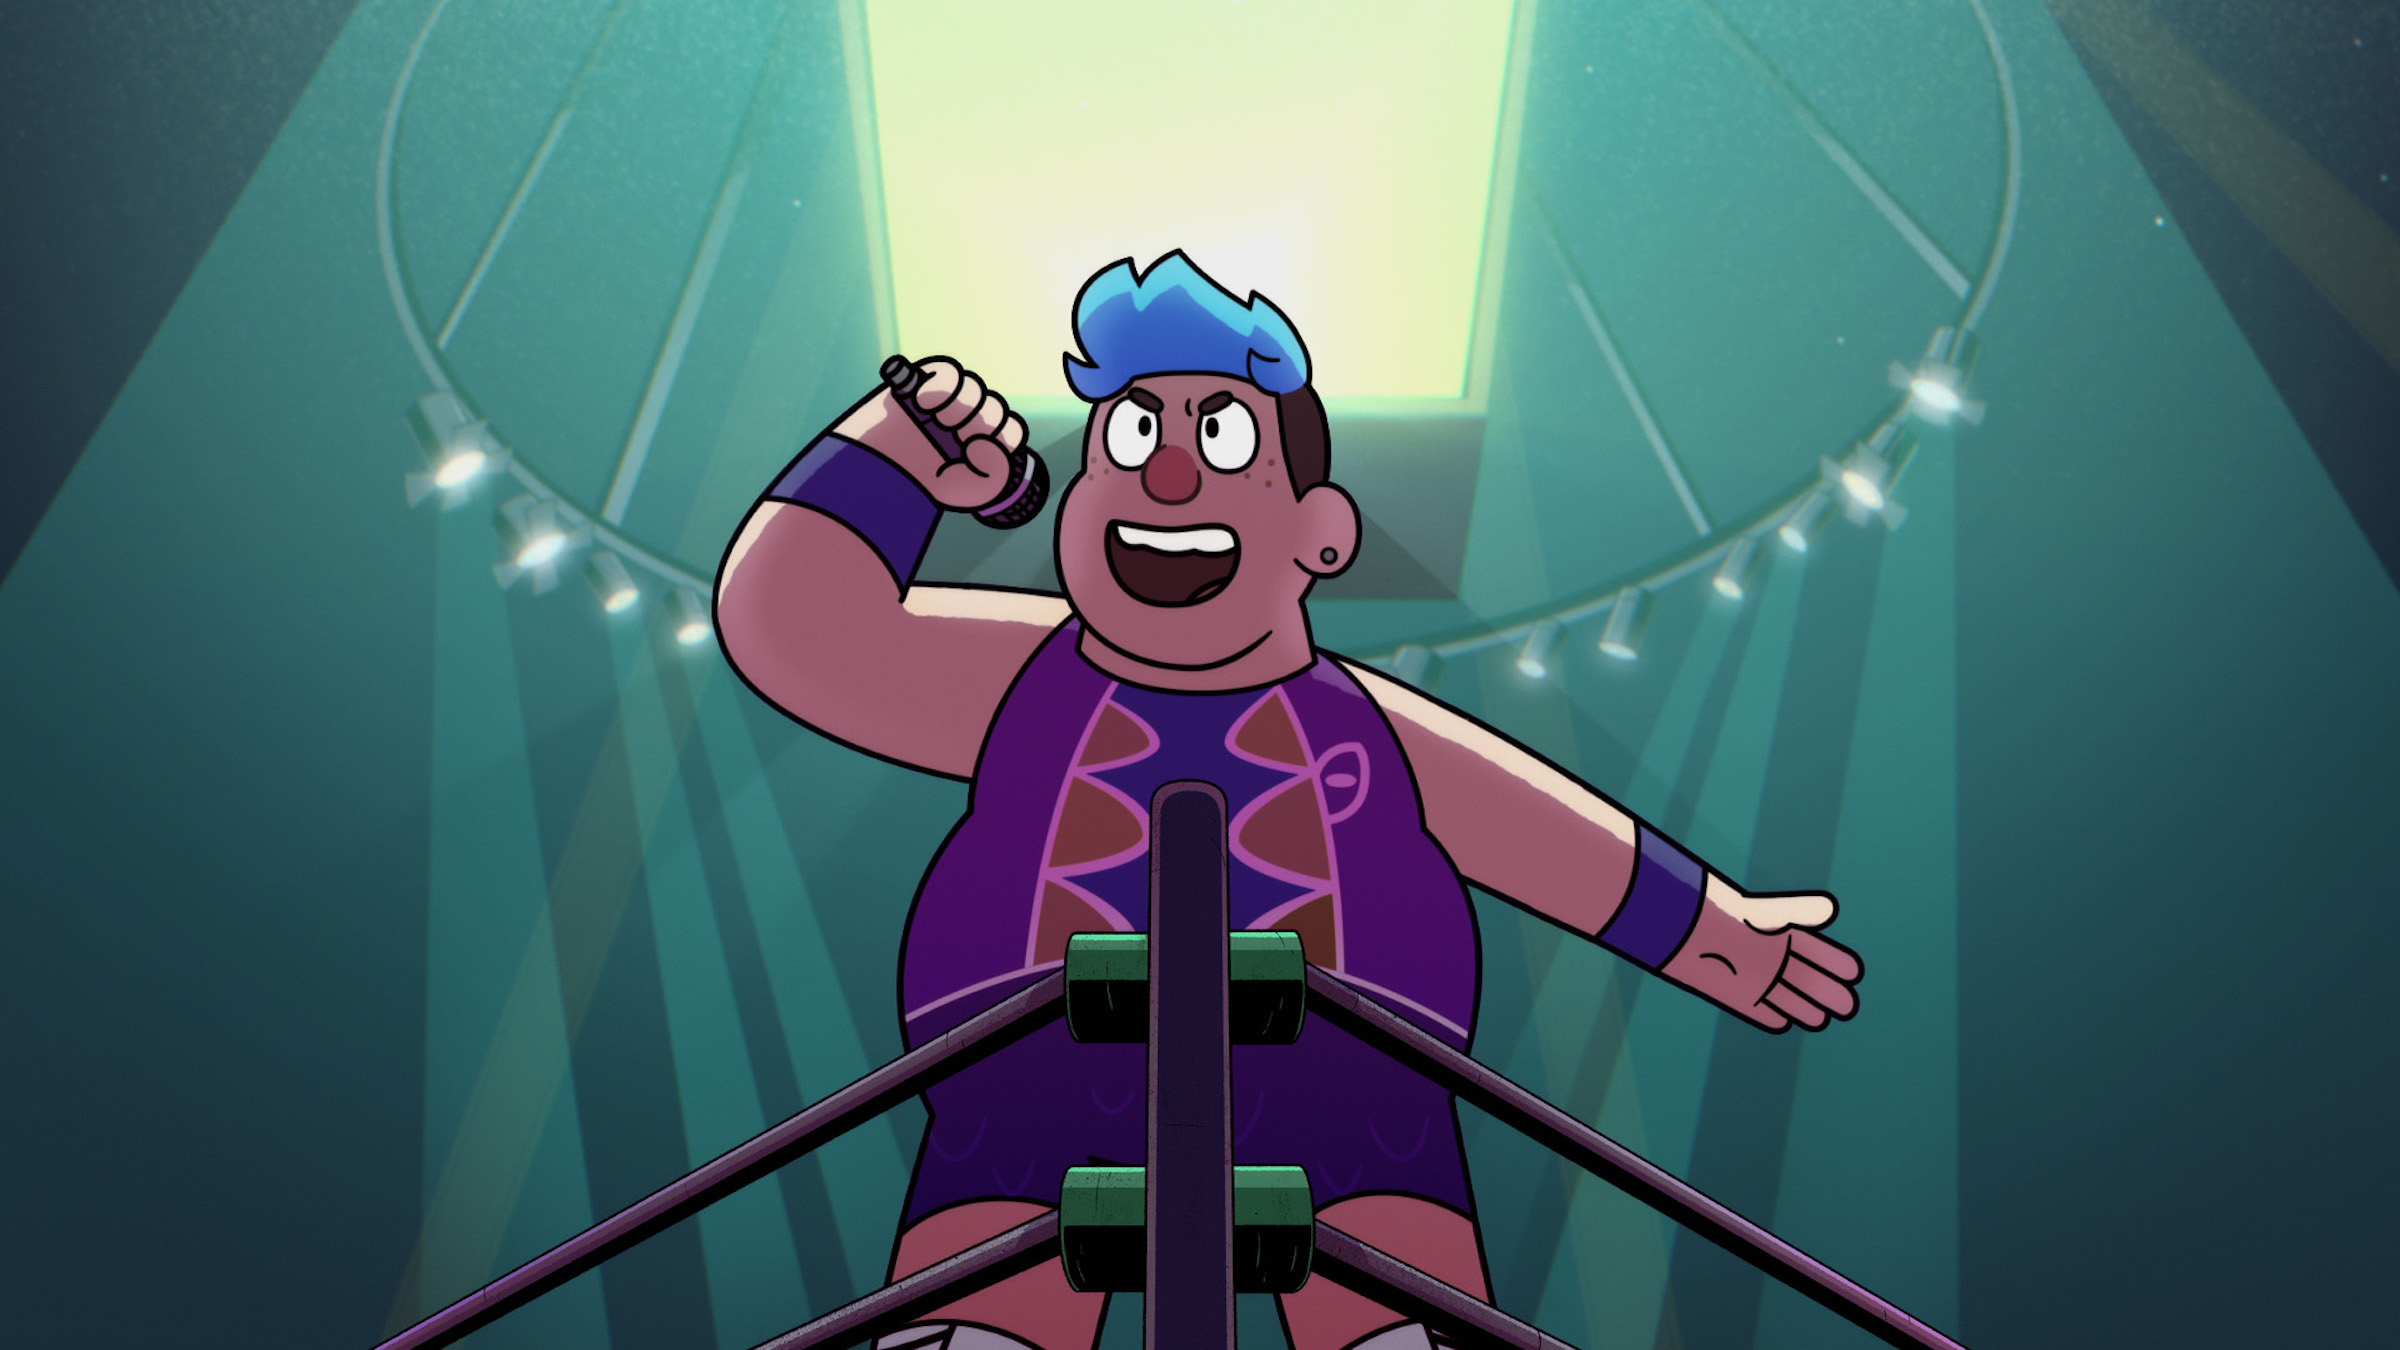 Barney stands at the corner of a wrestling ring, yelling triumphantly into a microphone